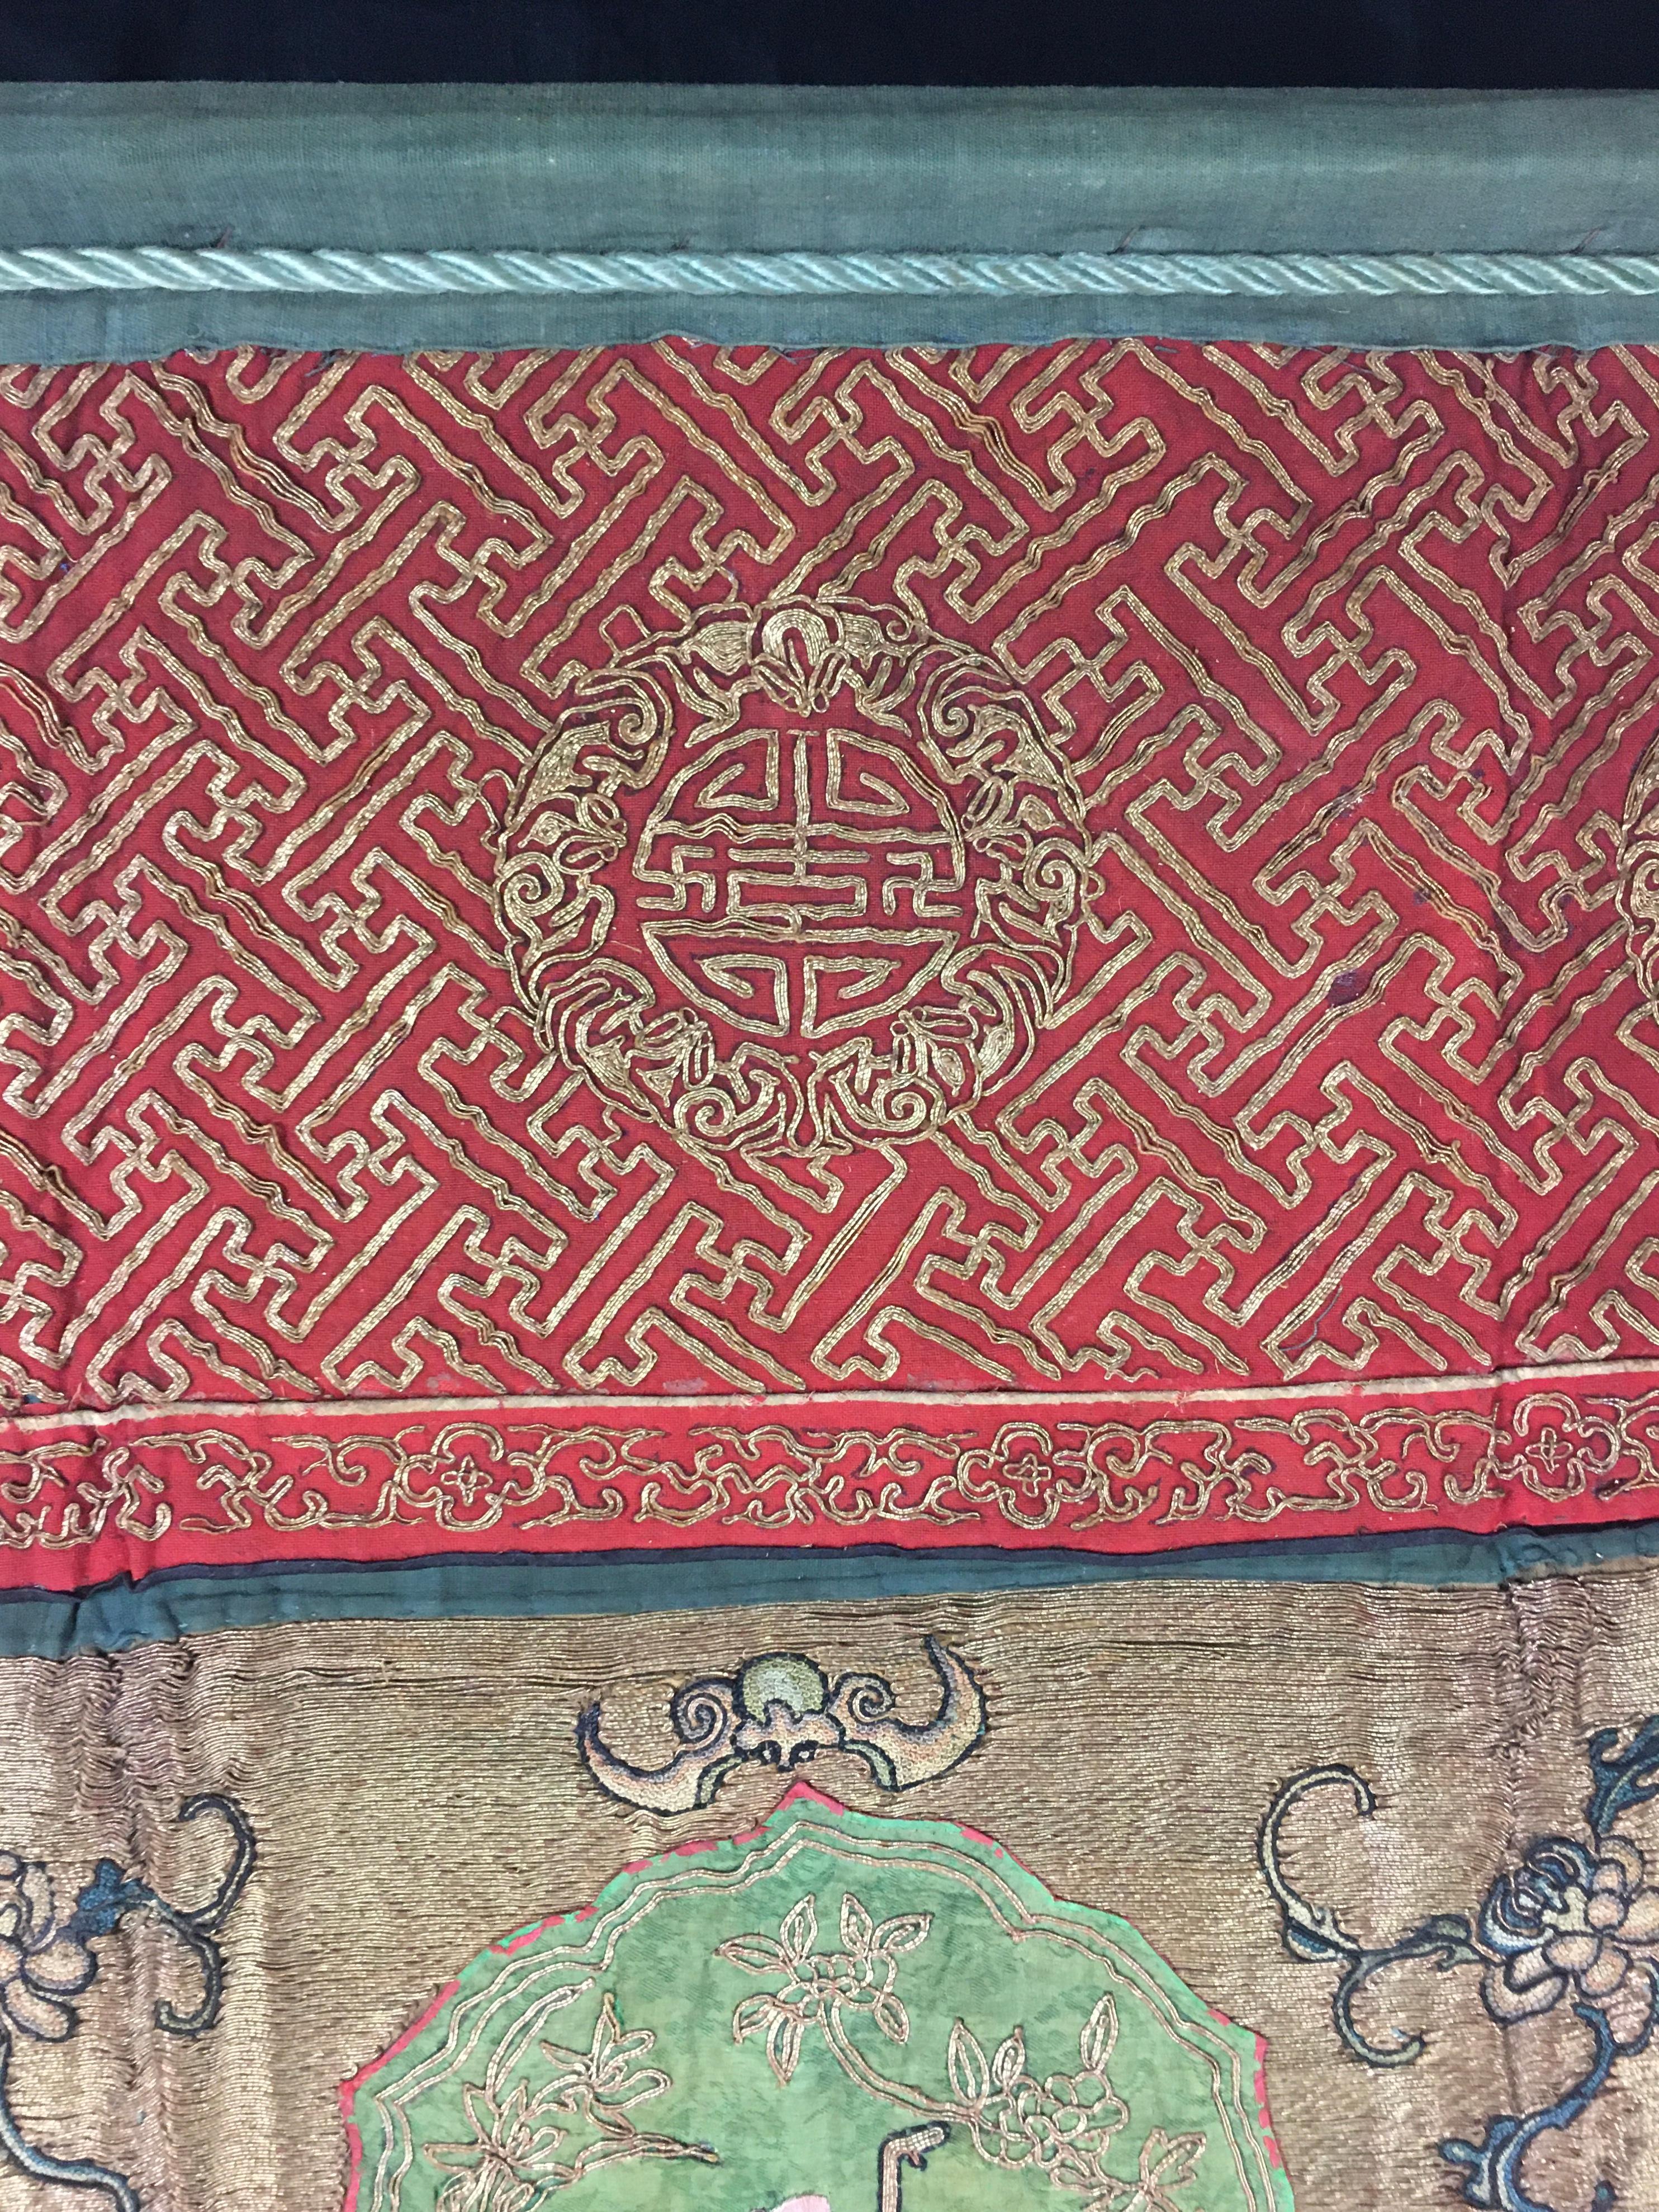 Qing Dynasty Period Gold and Red Embroidered Asian Portiere/Wall Hanging 1